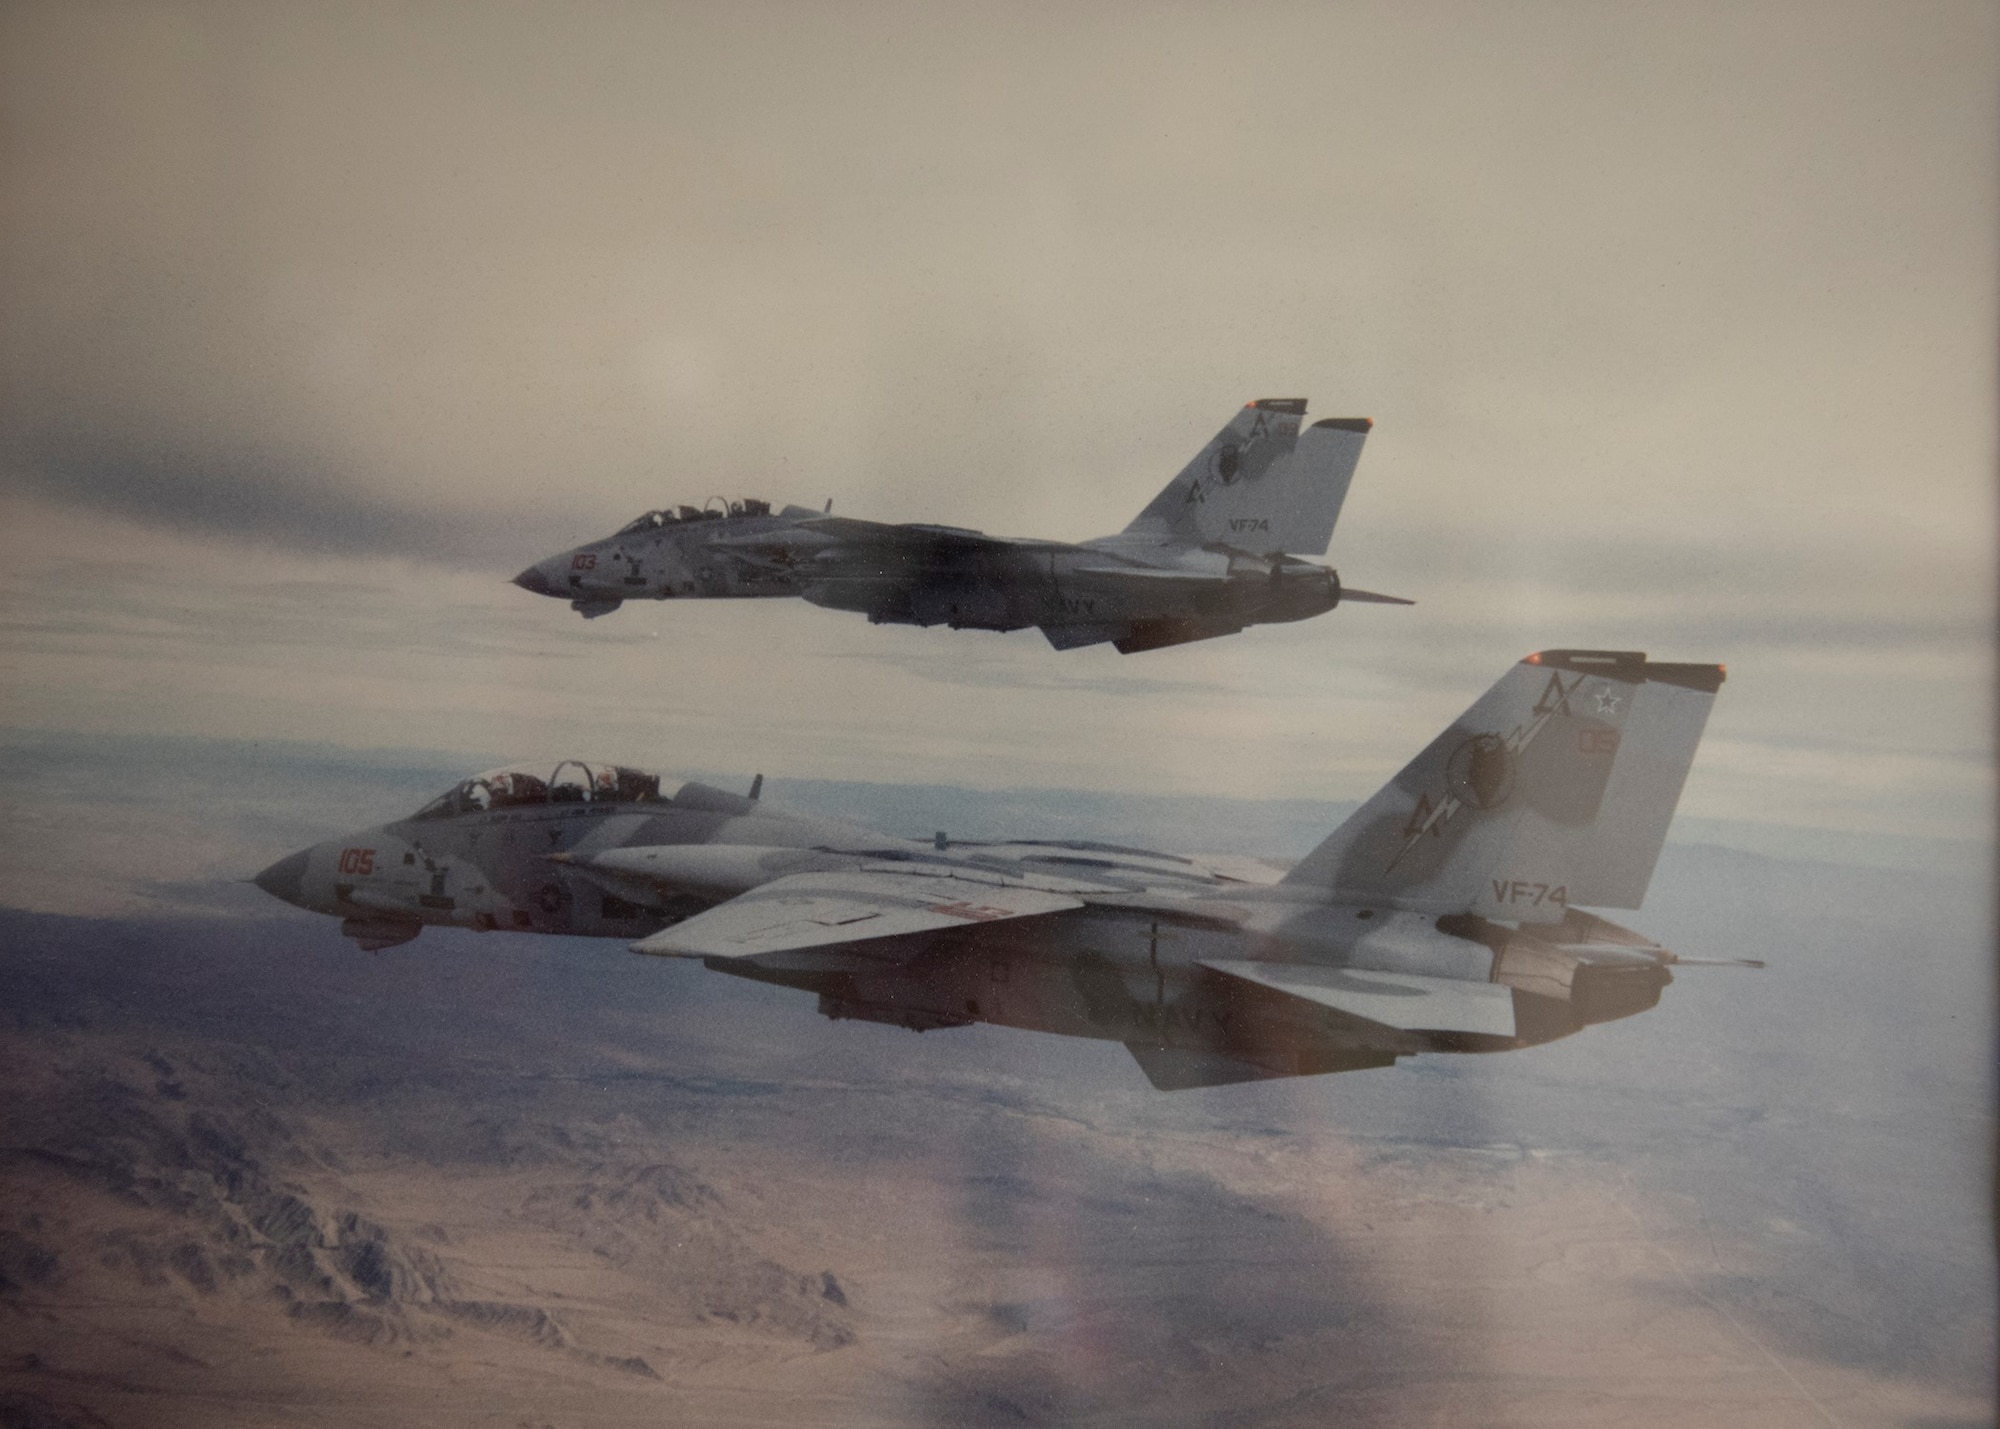 Two F-14s fly in formation.